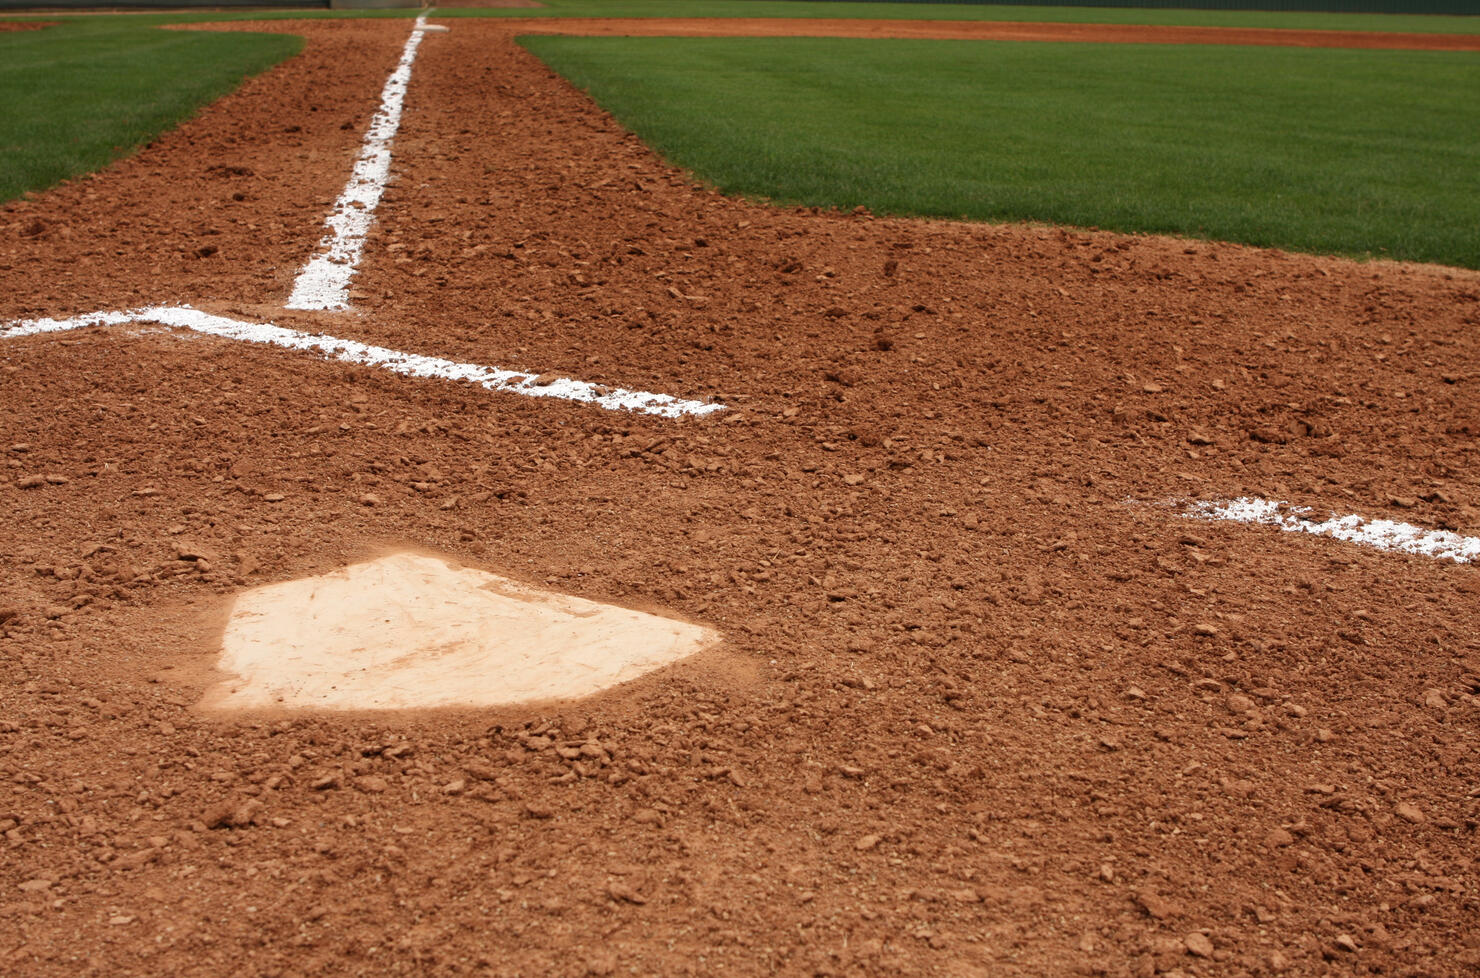 View of Home Plate on a Baseball Field